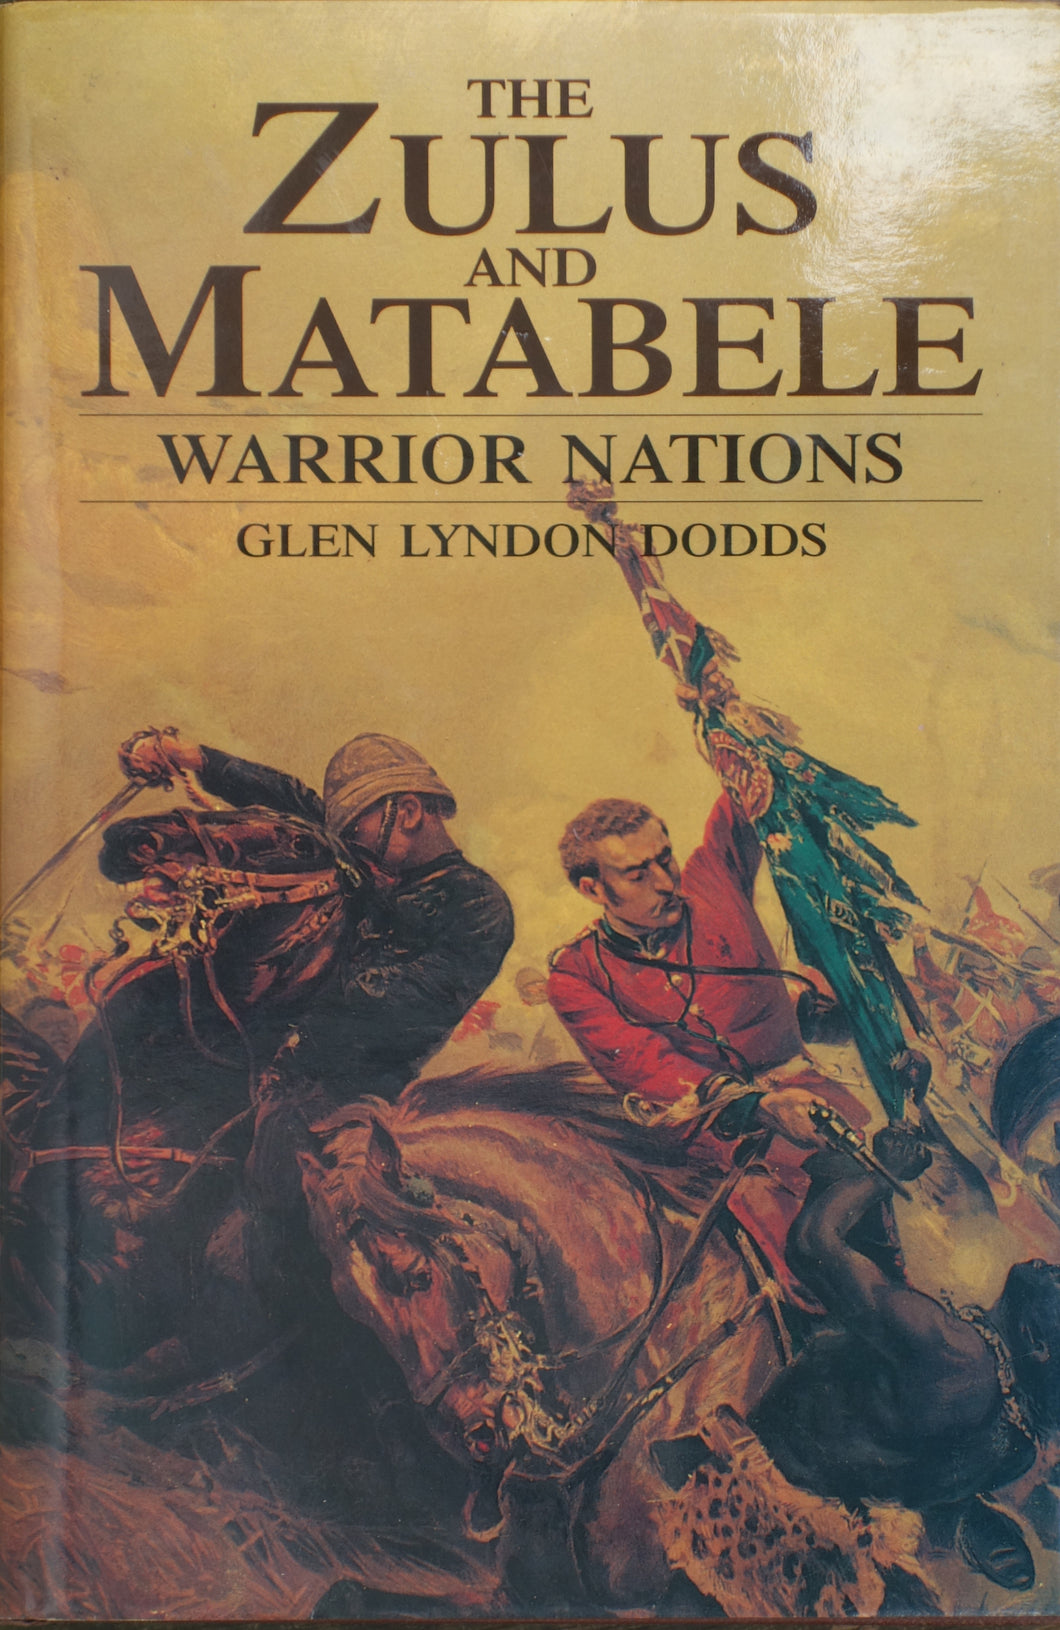 'THE ZULUS AND MATABELE; Warrior Nations' by Glen Lydon Dodds